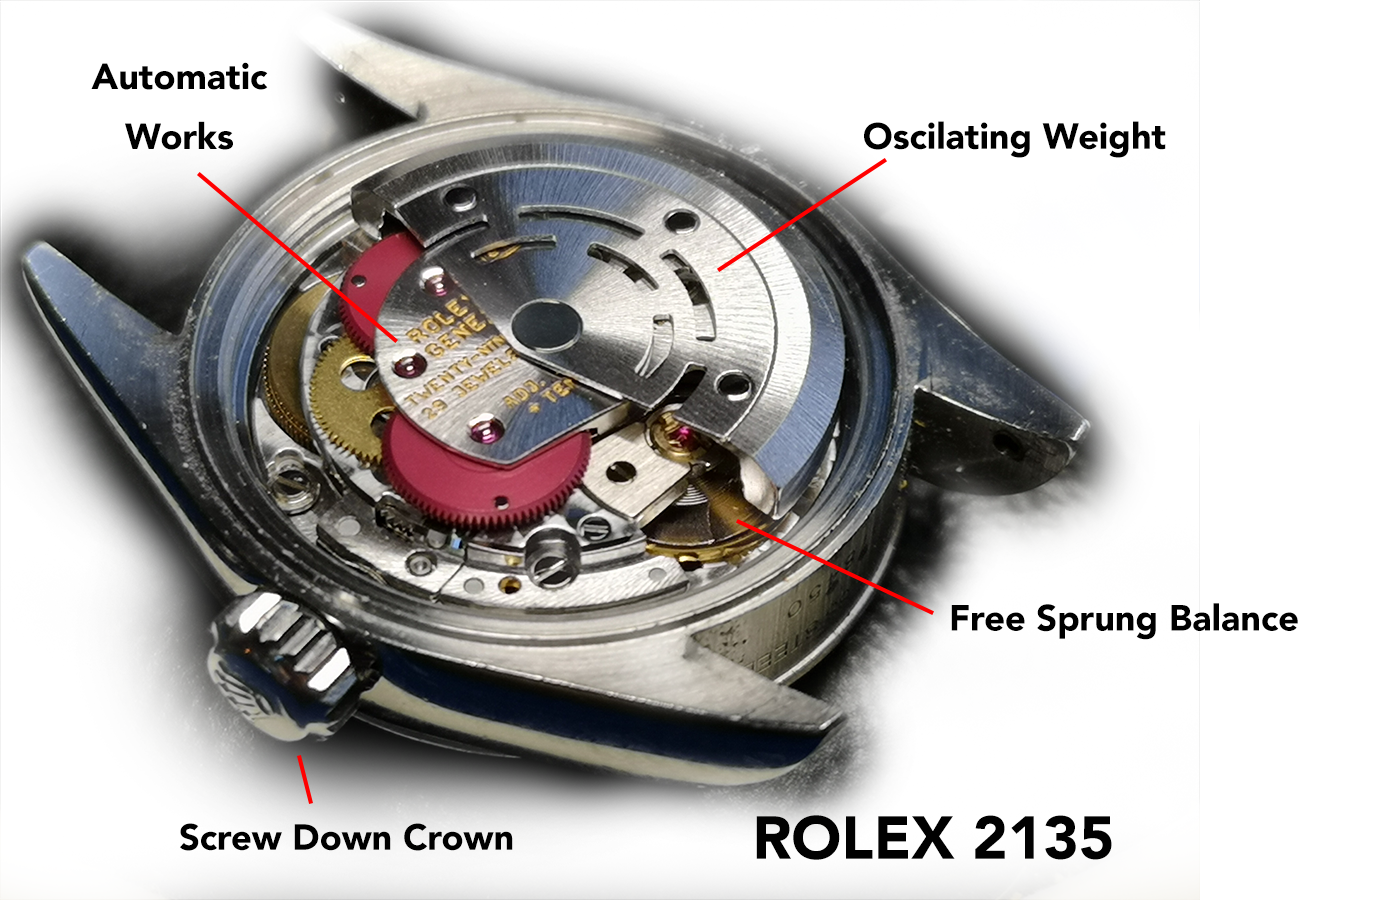 Image of Main components of the Rolex 2135 Movement